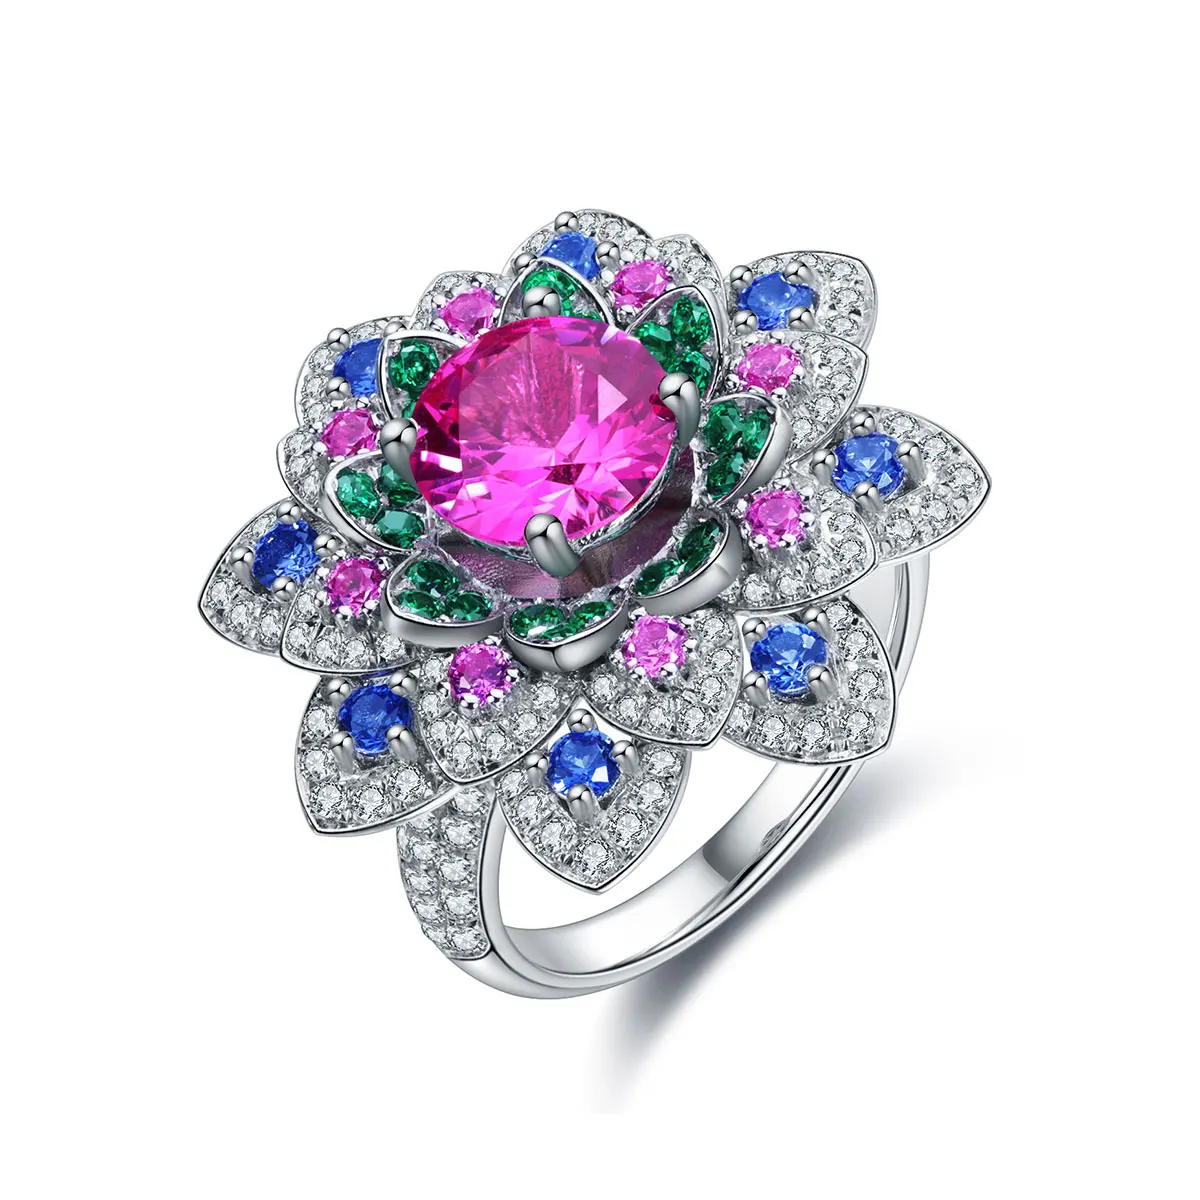 

Anster jewelry s925 sterling silver lab grown pink ruby sapphire gemstones ring round brilliant ring jewelry wholesale